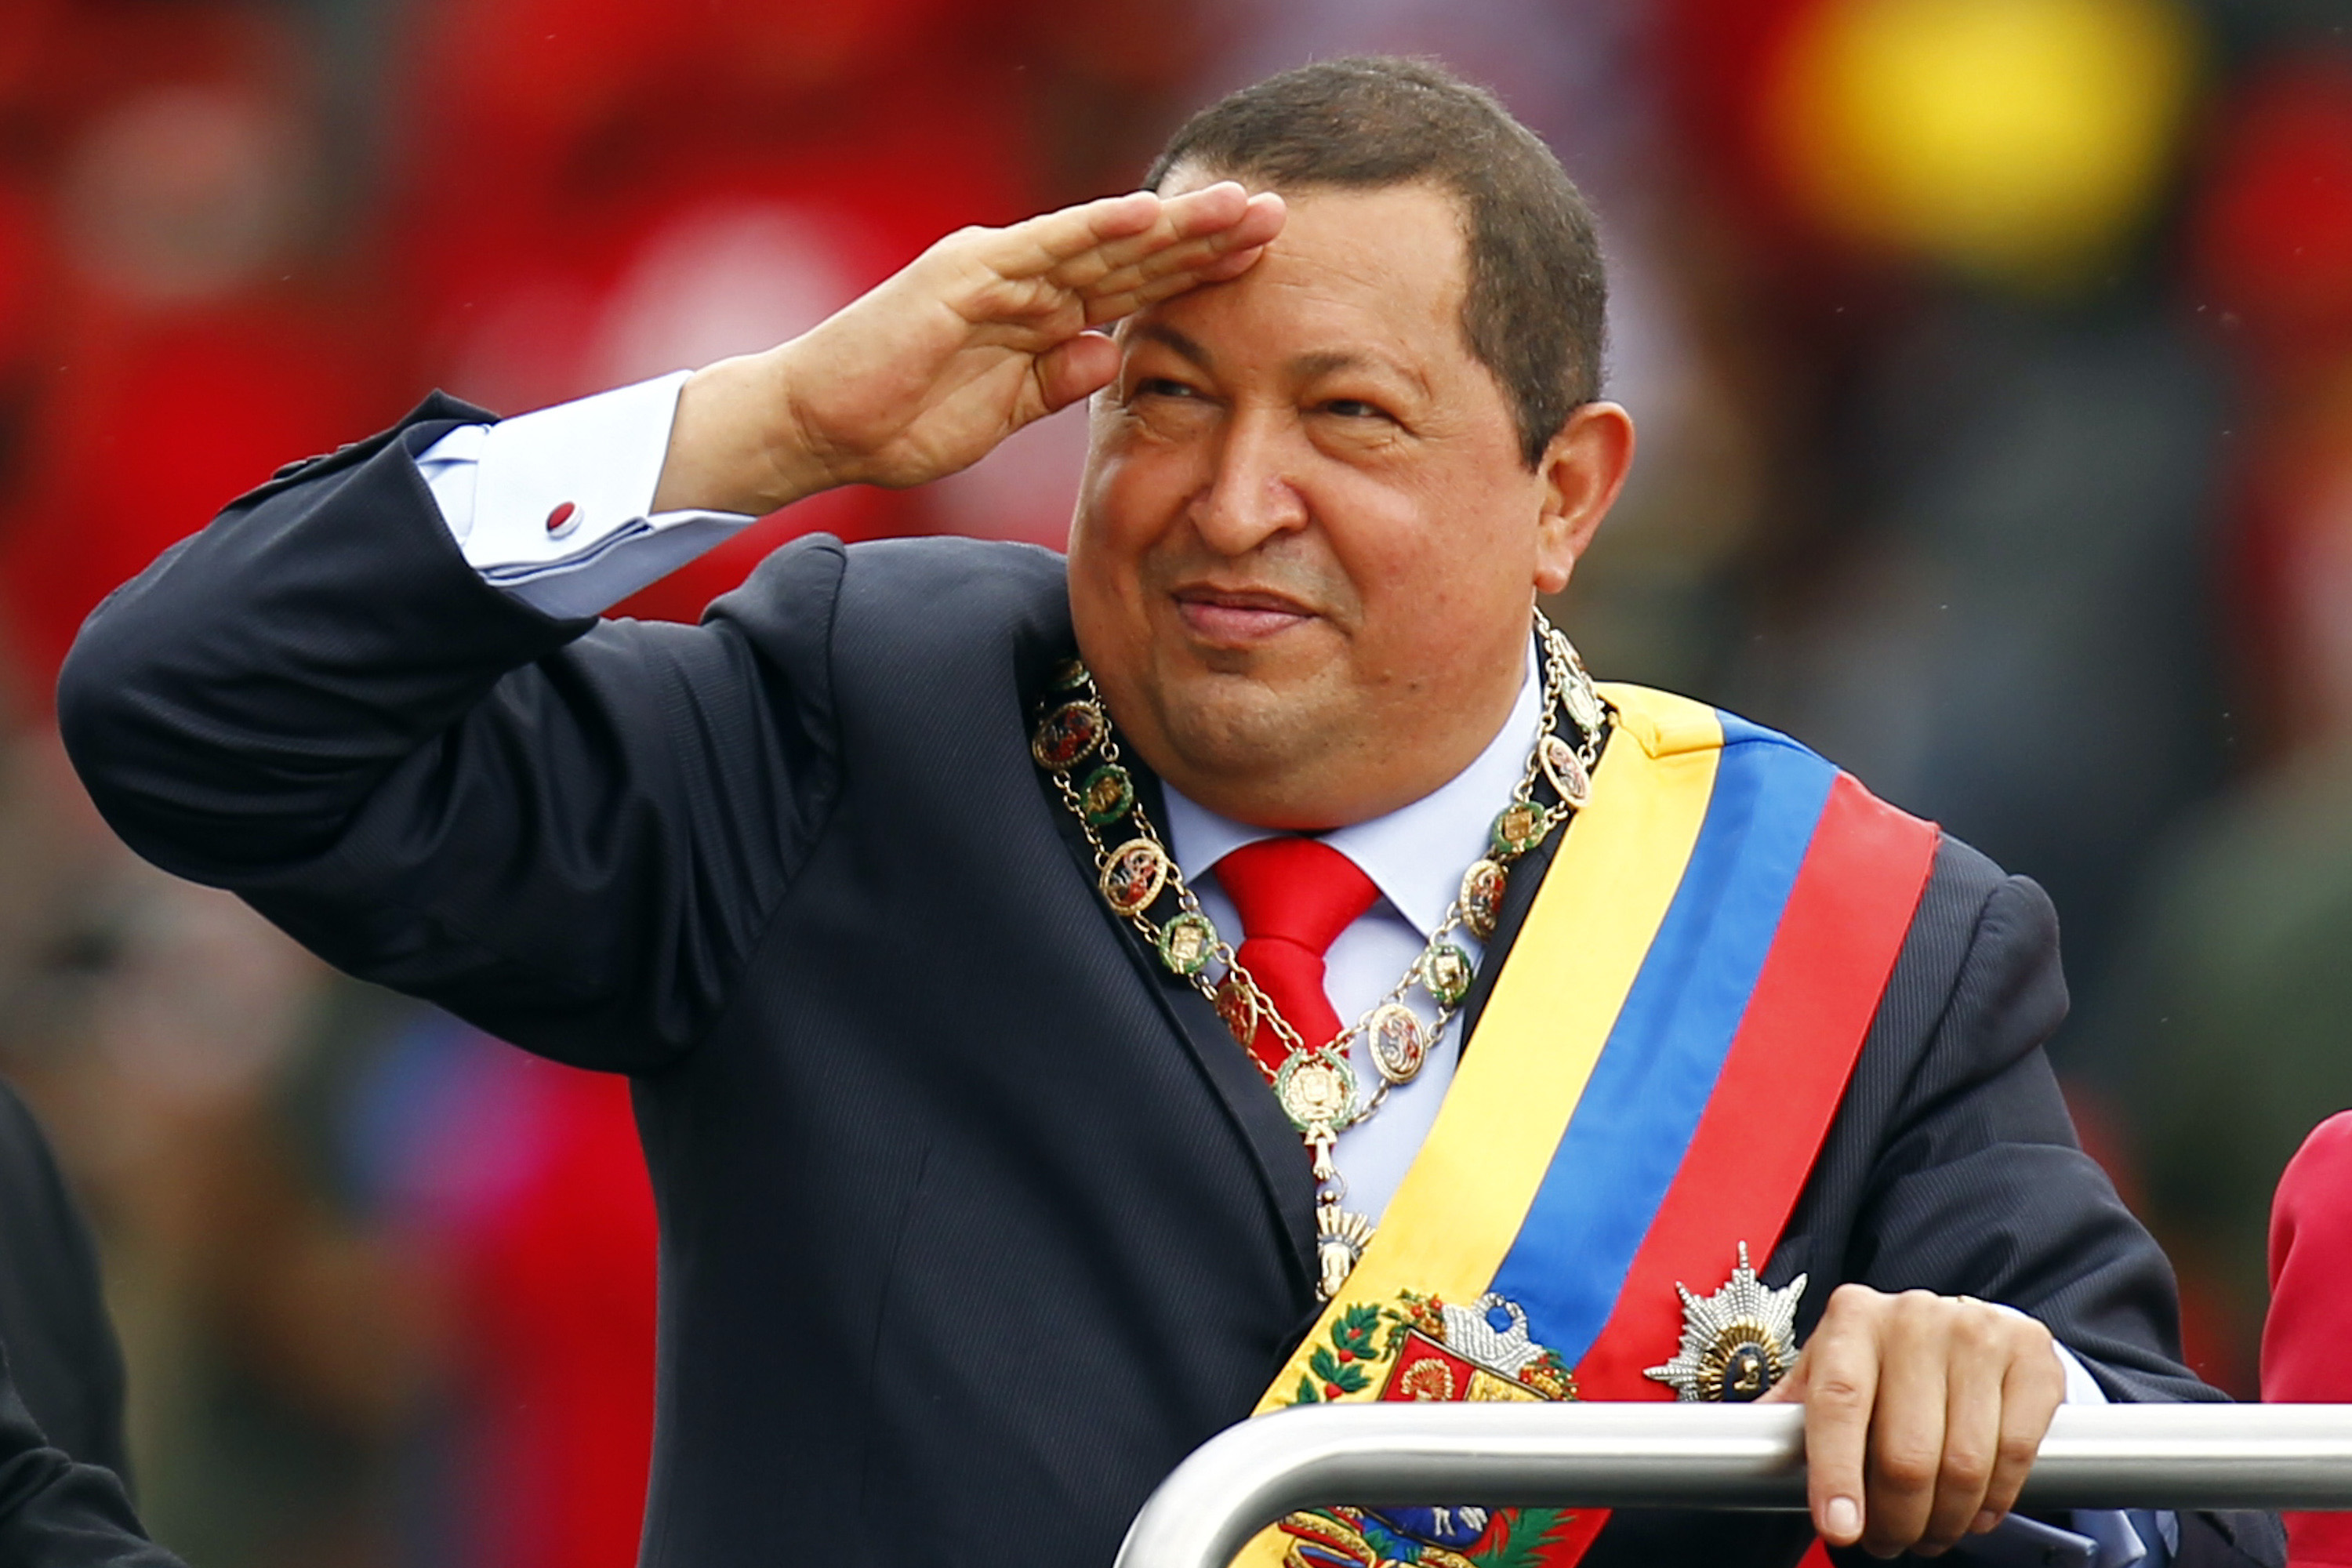 Venezuelan President Hugo Chavez arrives at a military parade to commemorate the 20th anniversary of his failed coup attempt in Caracas February 4, 2012. REUTERS/Jorge Silva (VENEZUELA - Tags: POLITICS) - RTR2XBKY